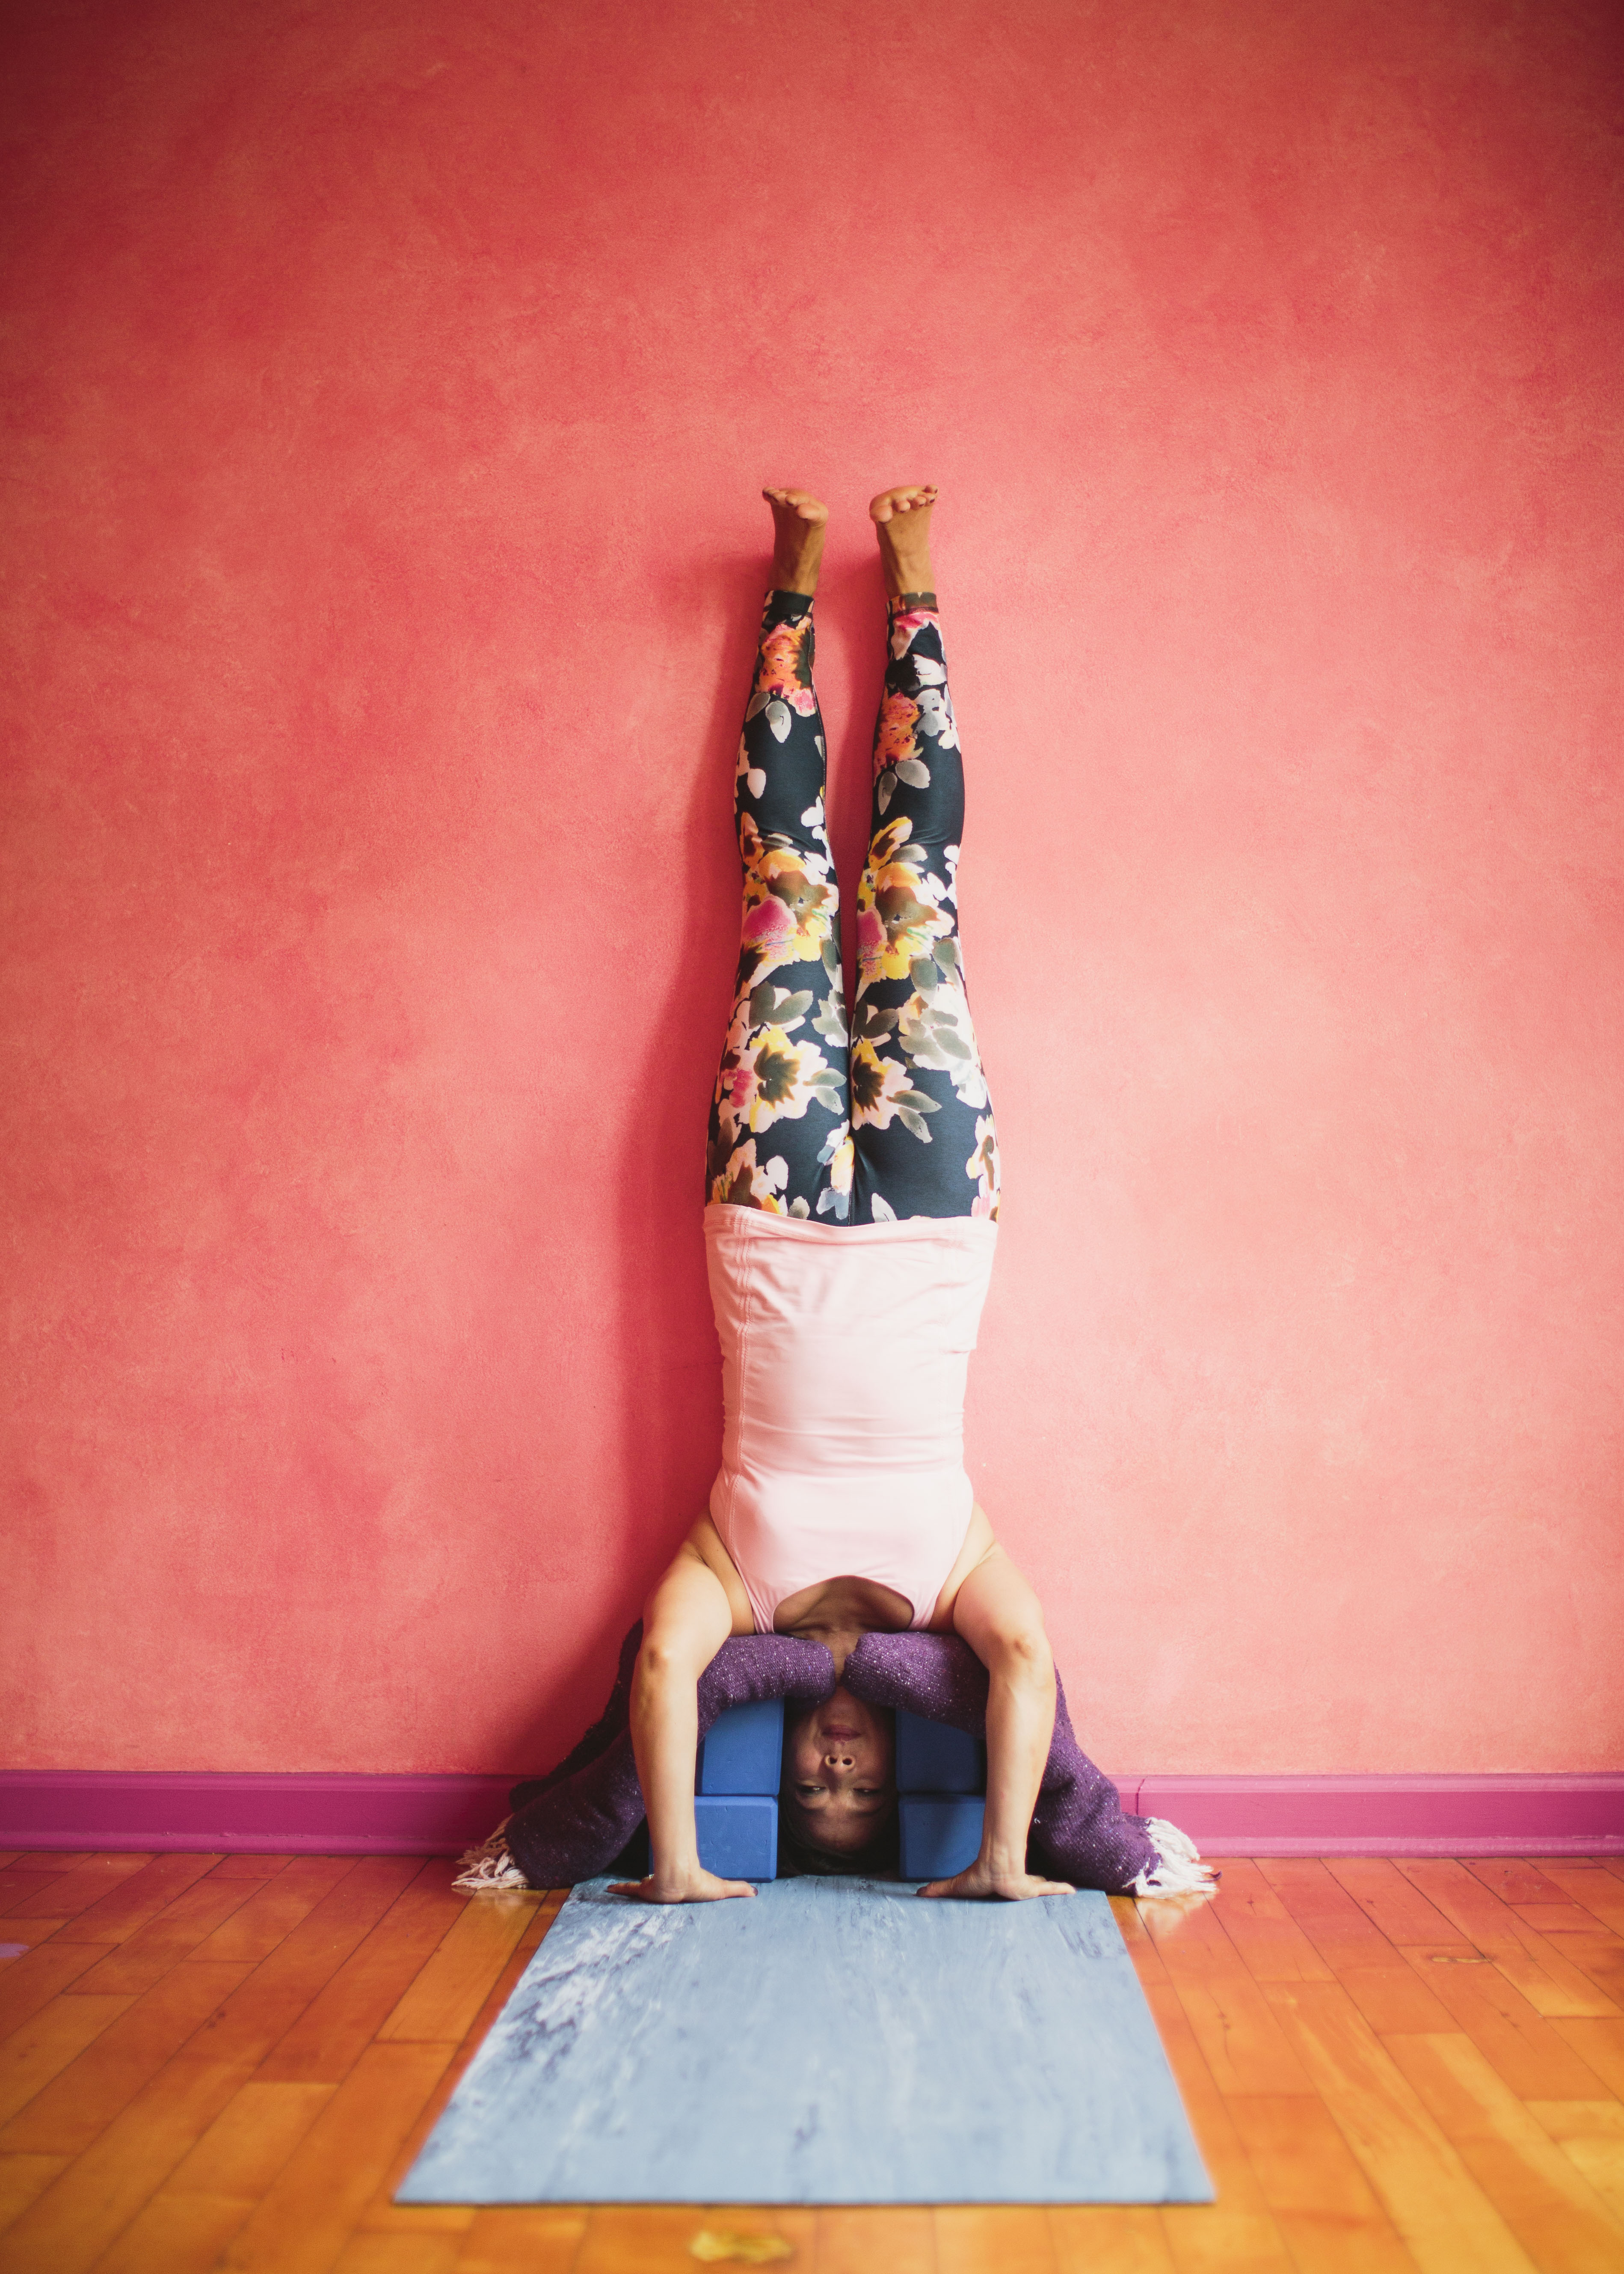 An Innovative Supported Headstand That Will Help You Overcome Your